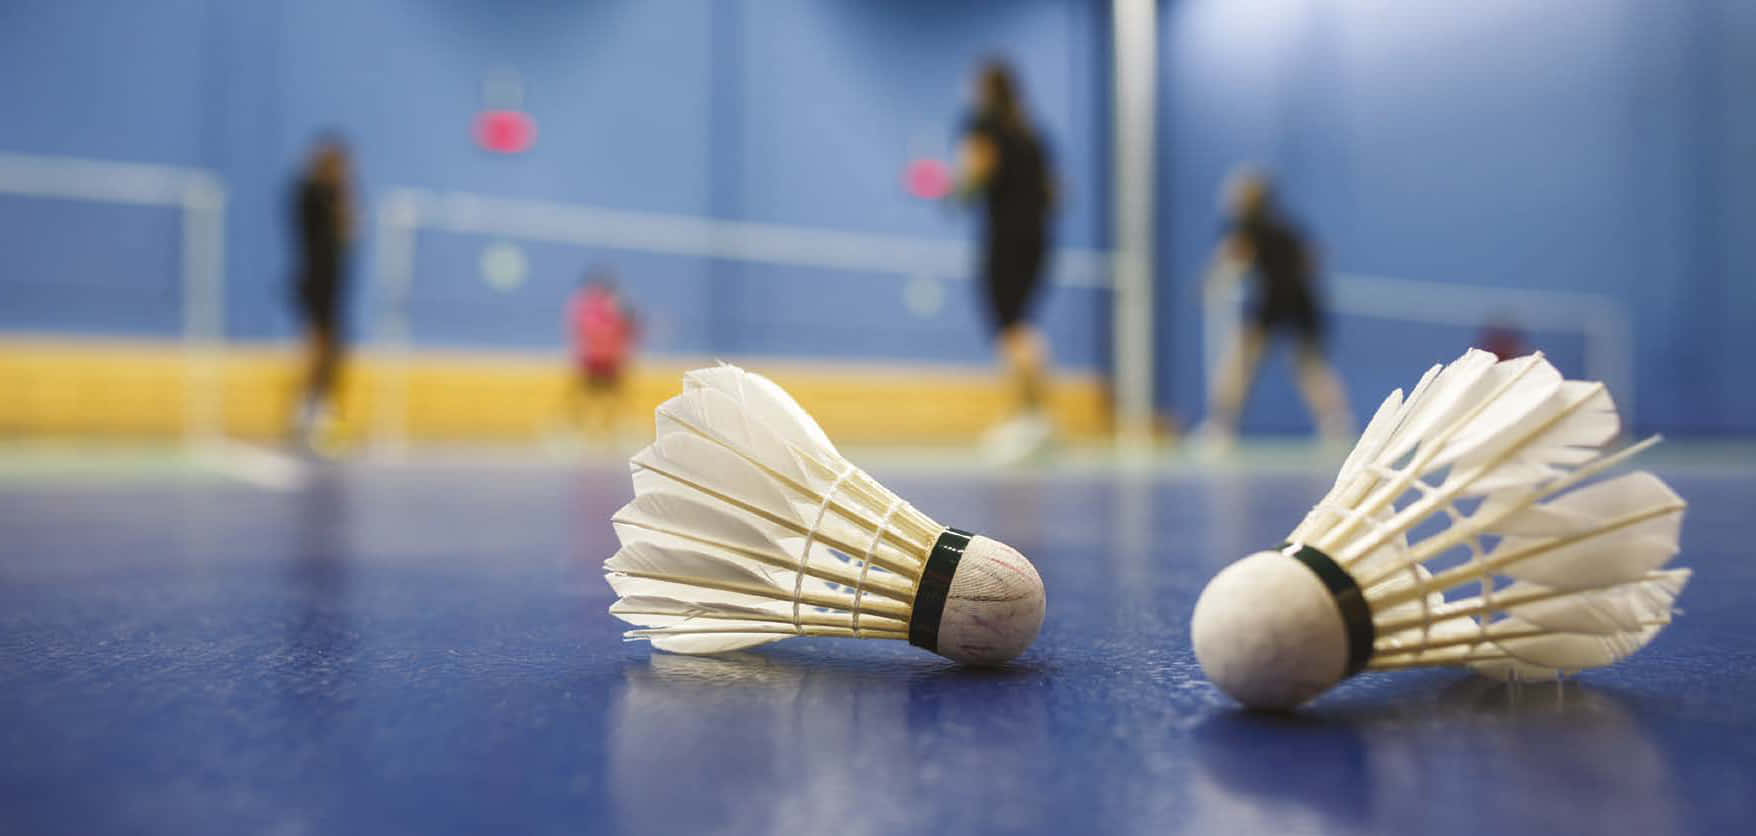 Badminton Court With Two Shuttlecocks On It